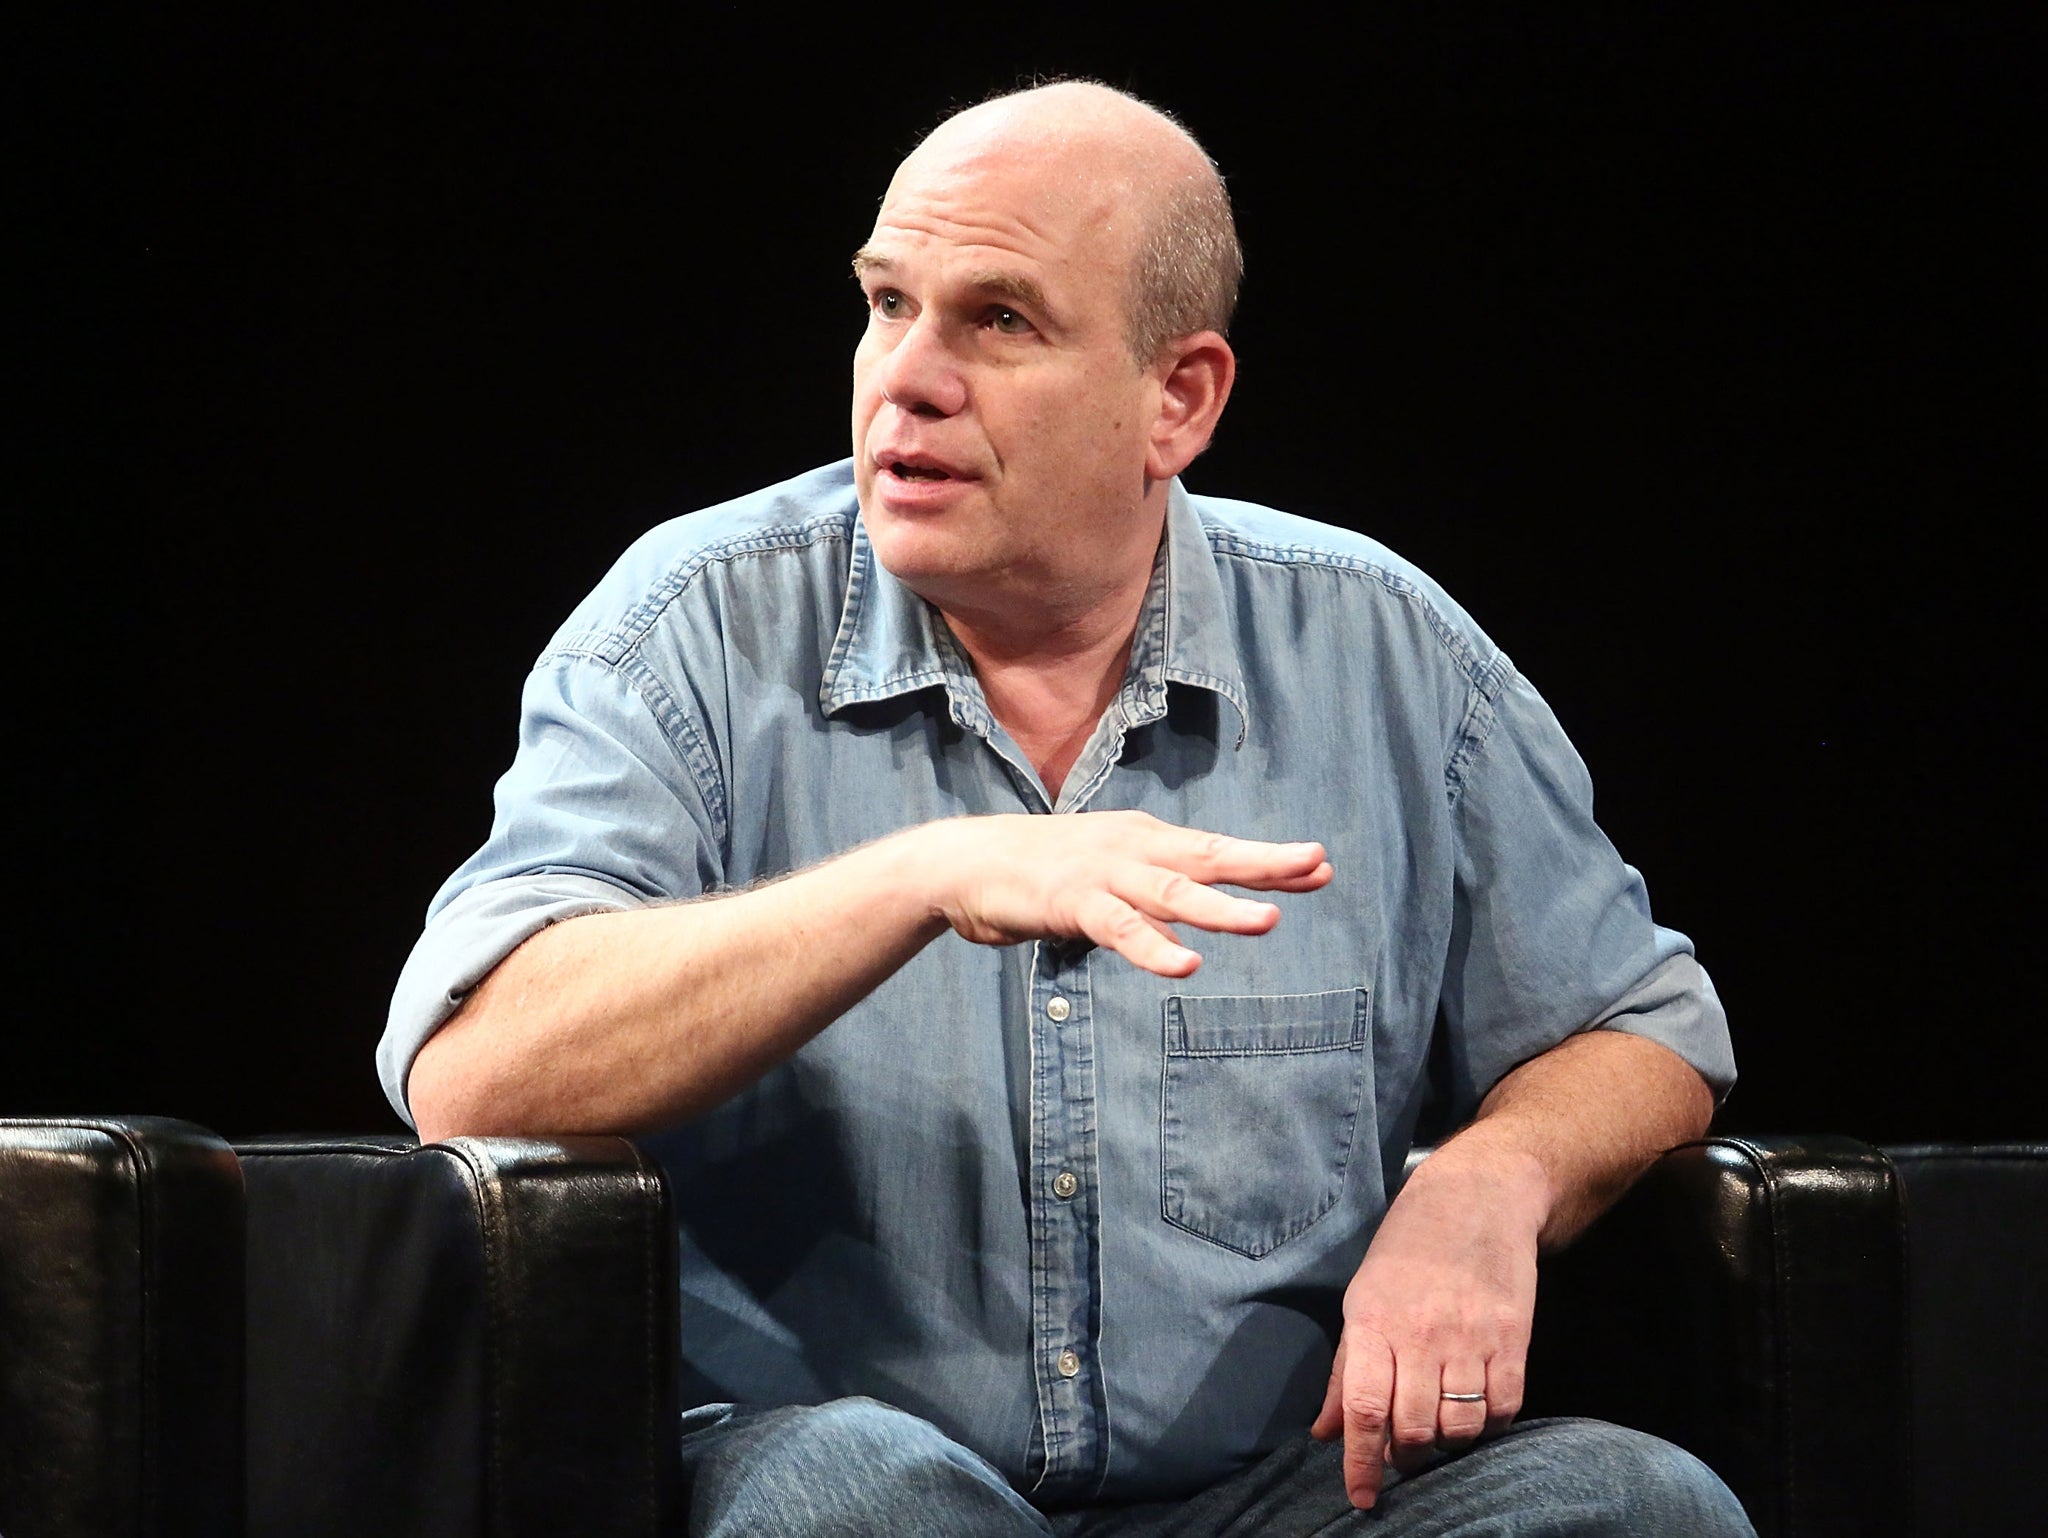 David Simon, creator of HBO series "The Wire", talks during Future Of Film Panel: Stories By Numbers